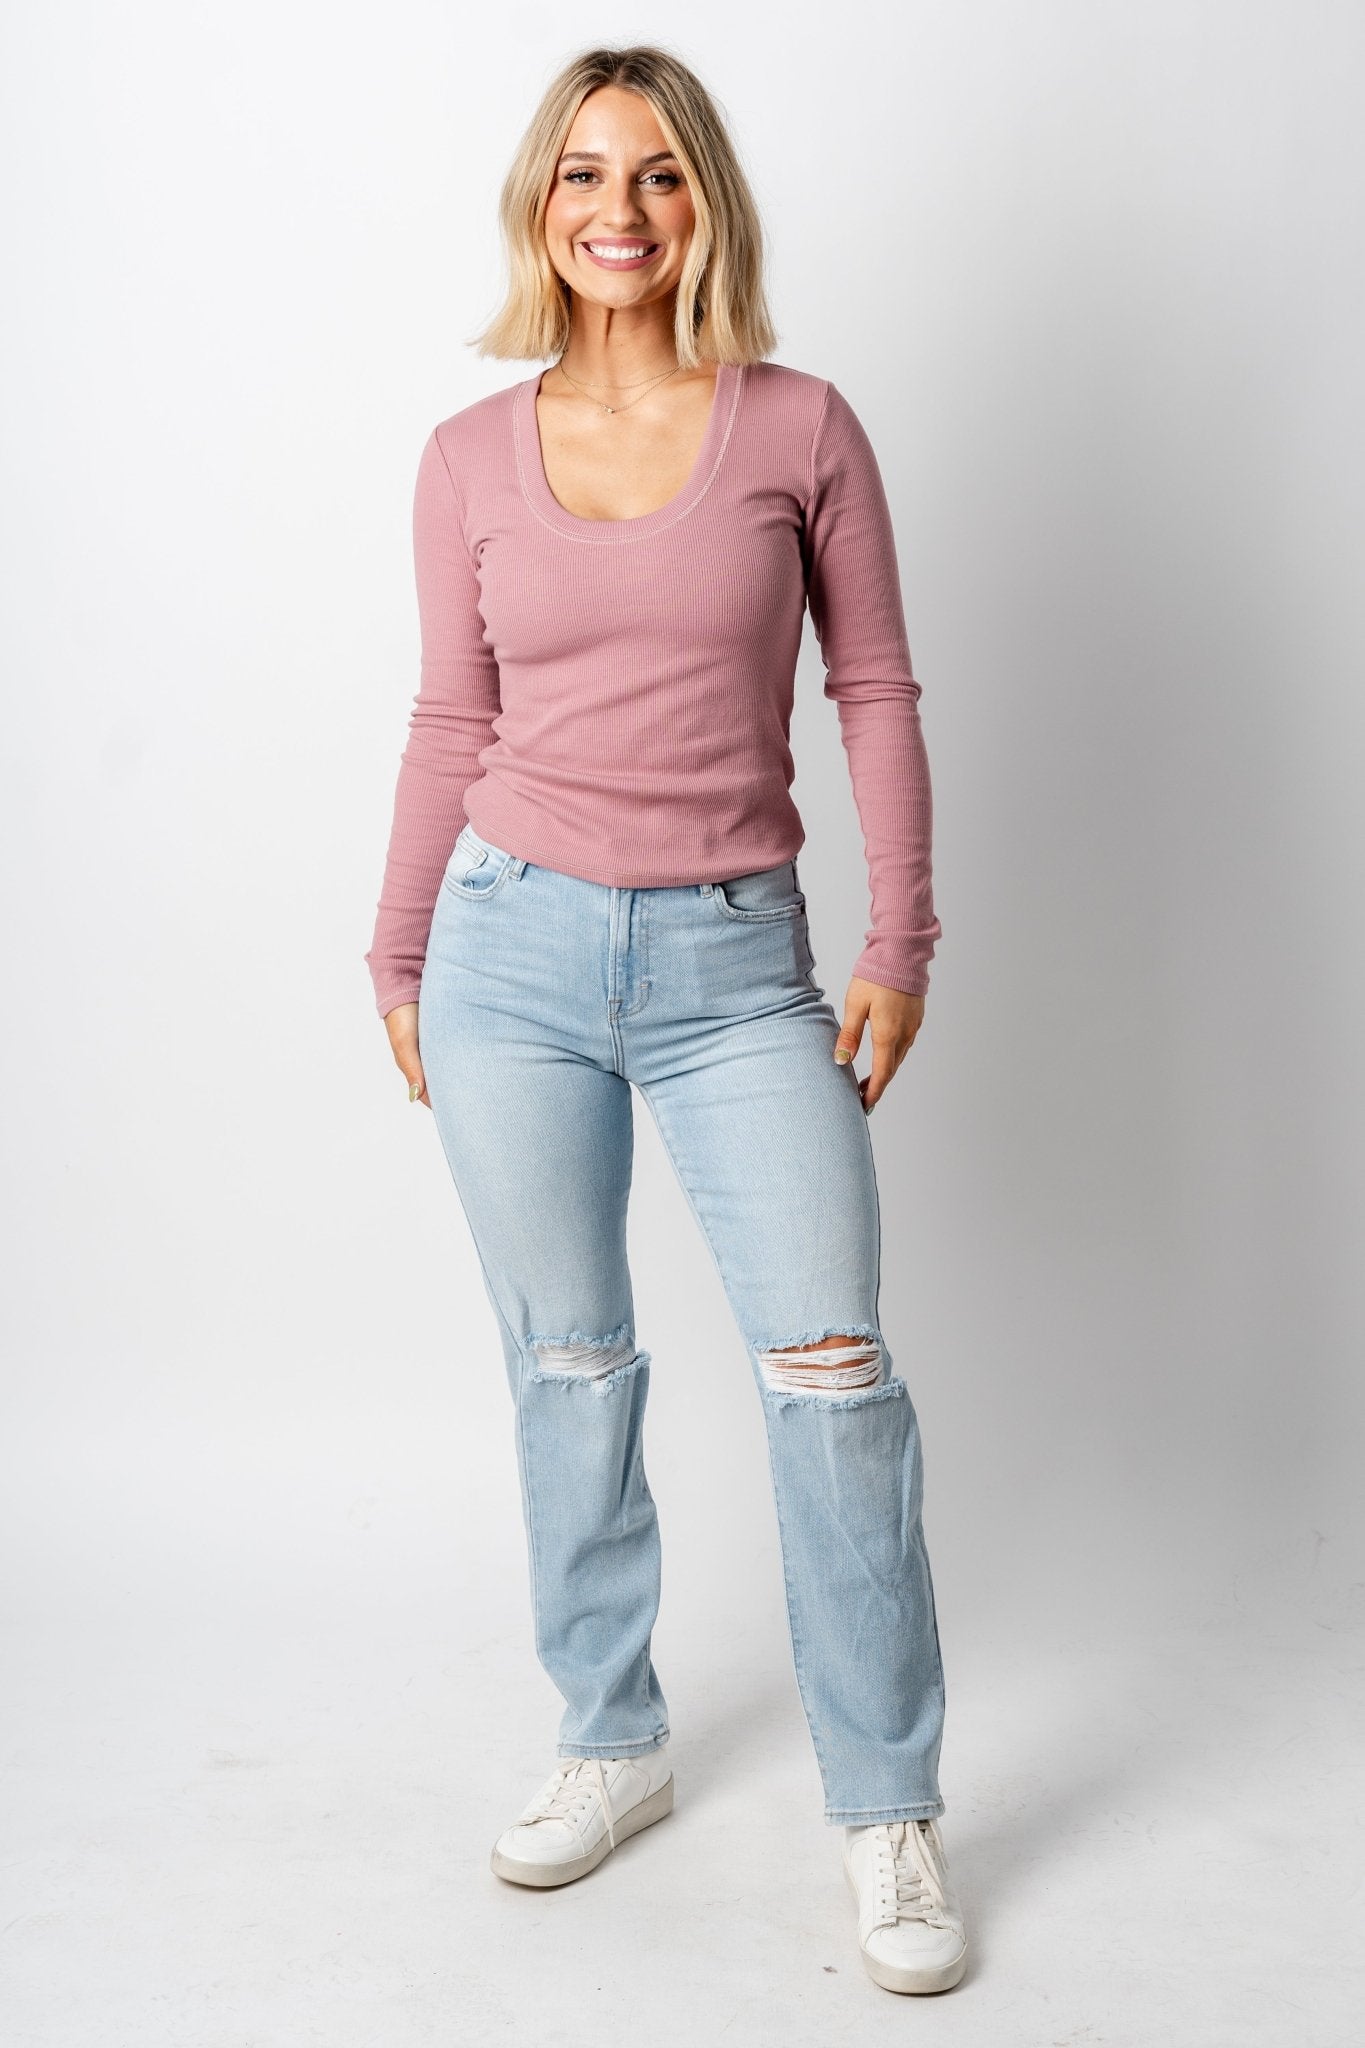 Z Supply Sirena ribbed long sleeve top misty mauve - Z Supply T-shirts - Z Supply Clothing at Lush Fashion Lounge Trendy Boutique Oklahoma City